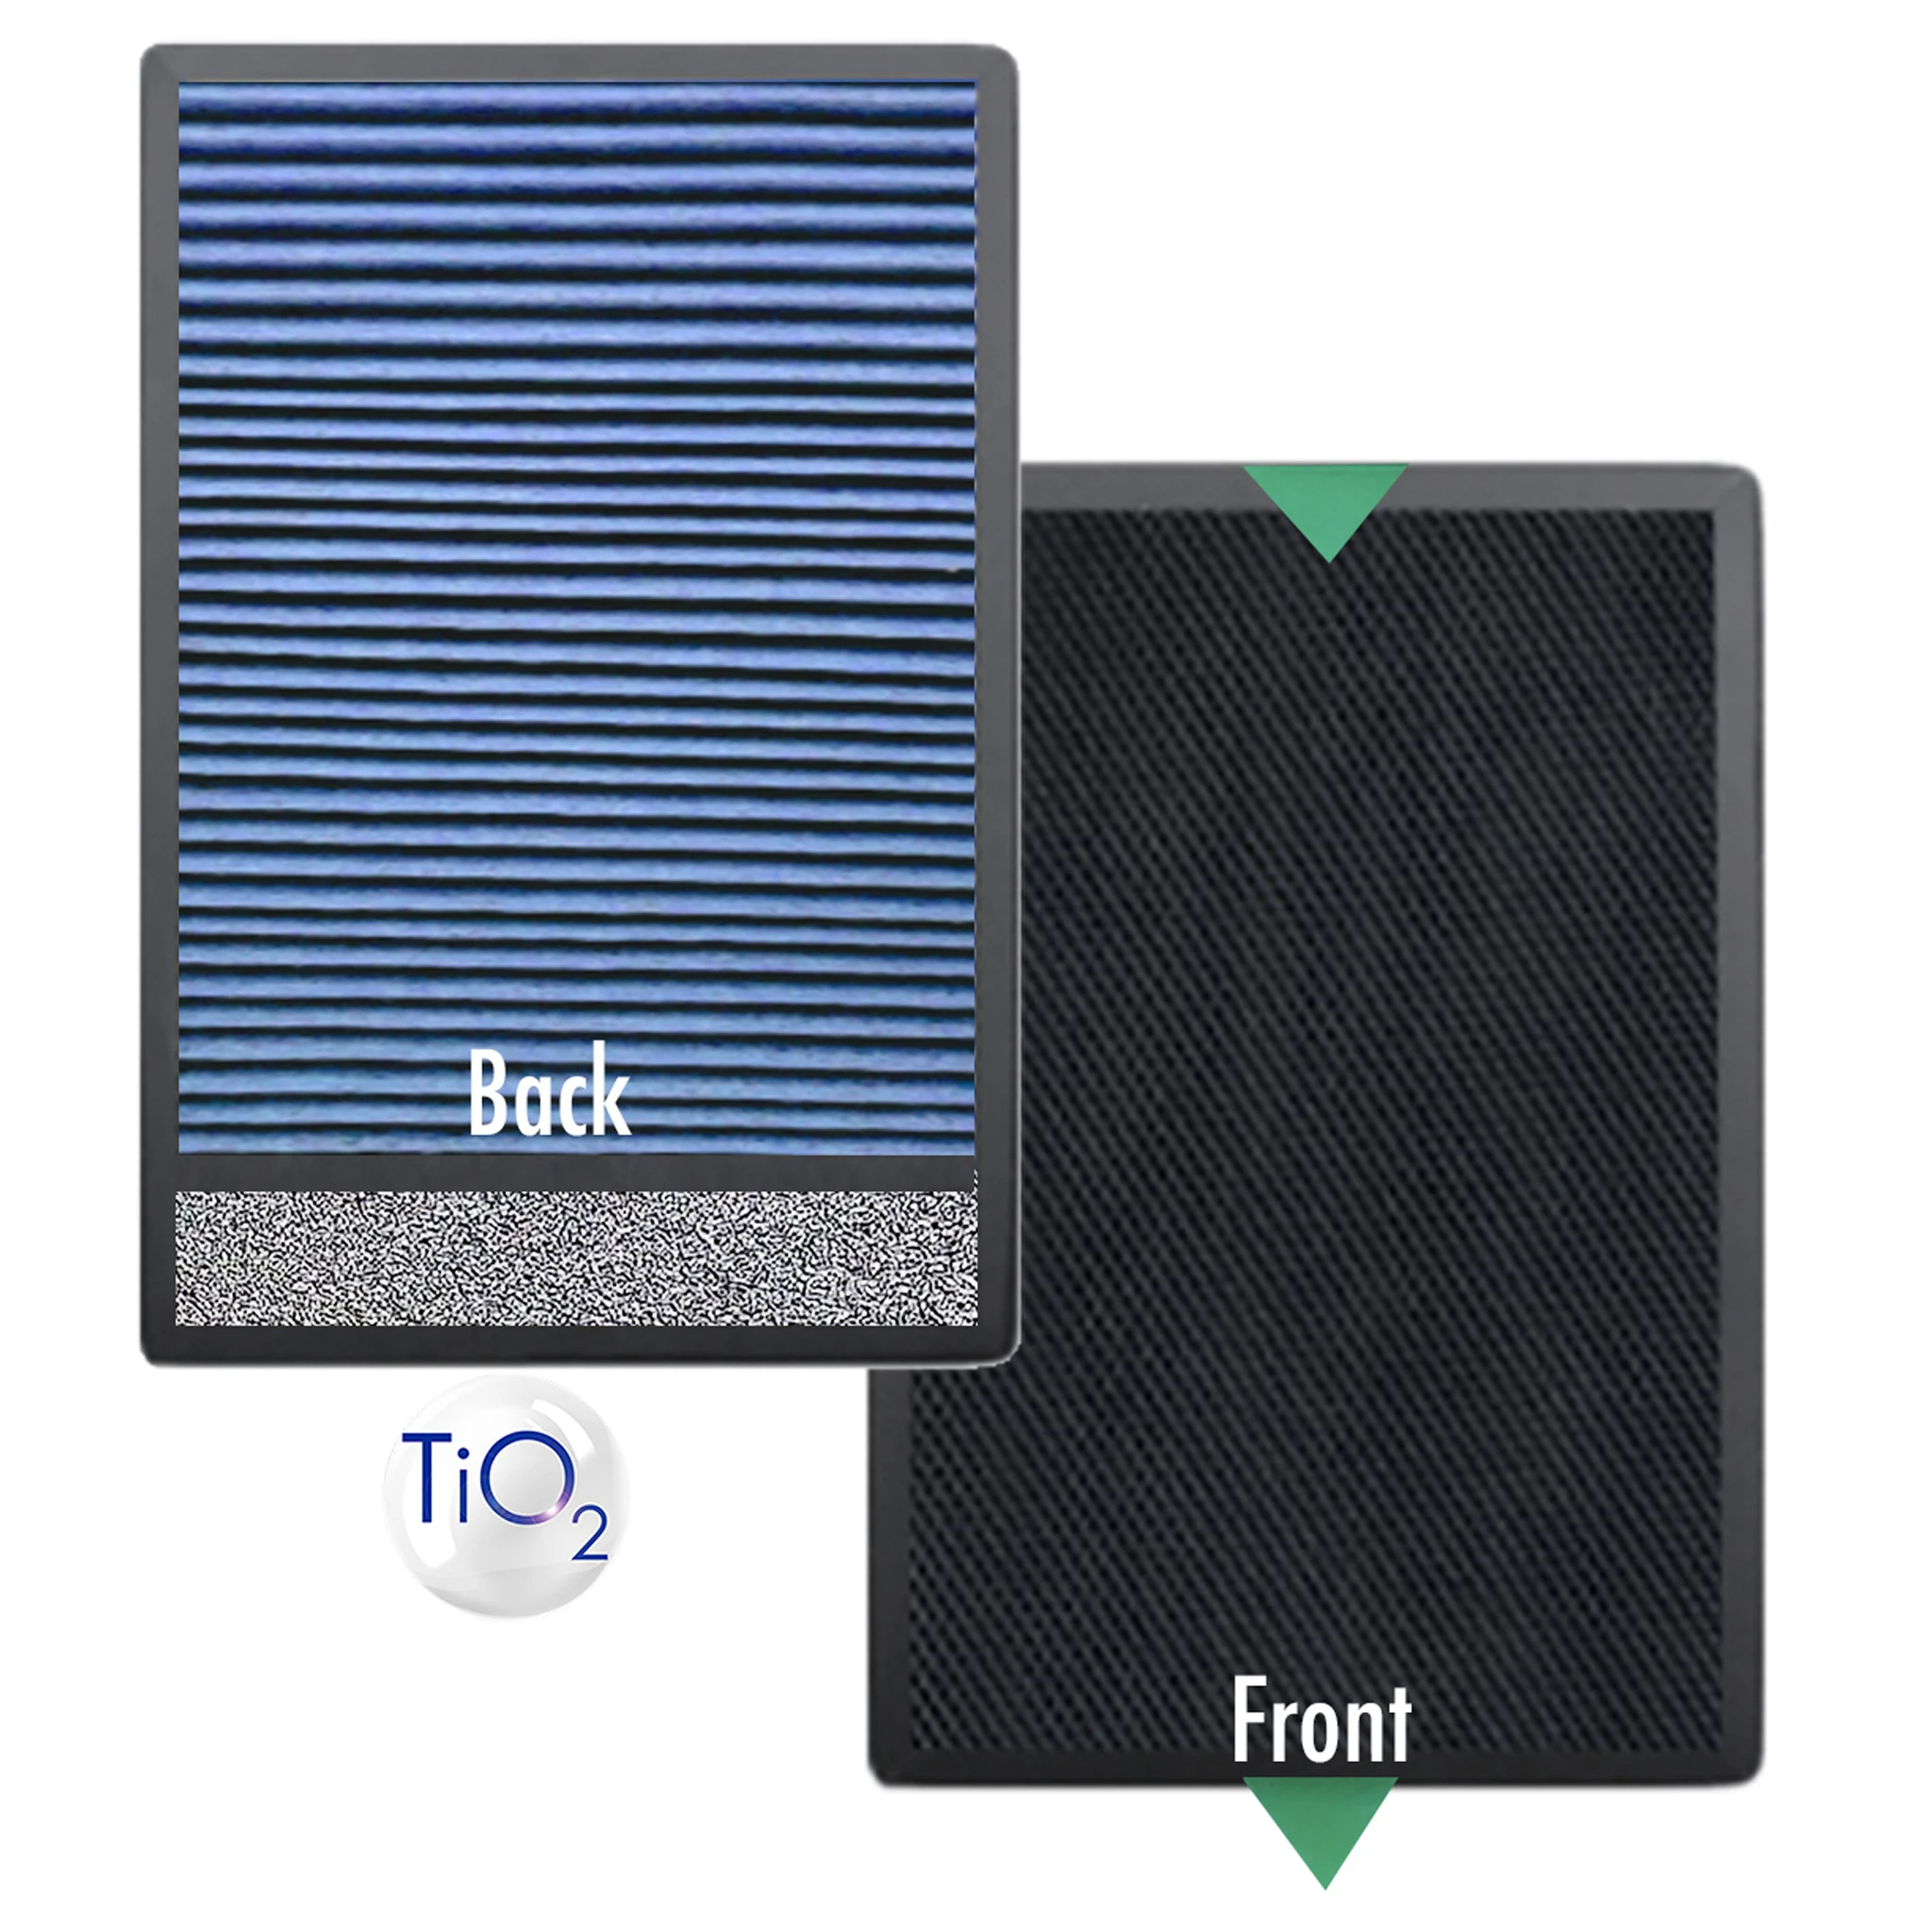 

Bork A501,A503,A701,A700,A800,A704 Air Purifier Filter Compatible TiO2 Hepa Carbon Apatite Multifunctional + Protective